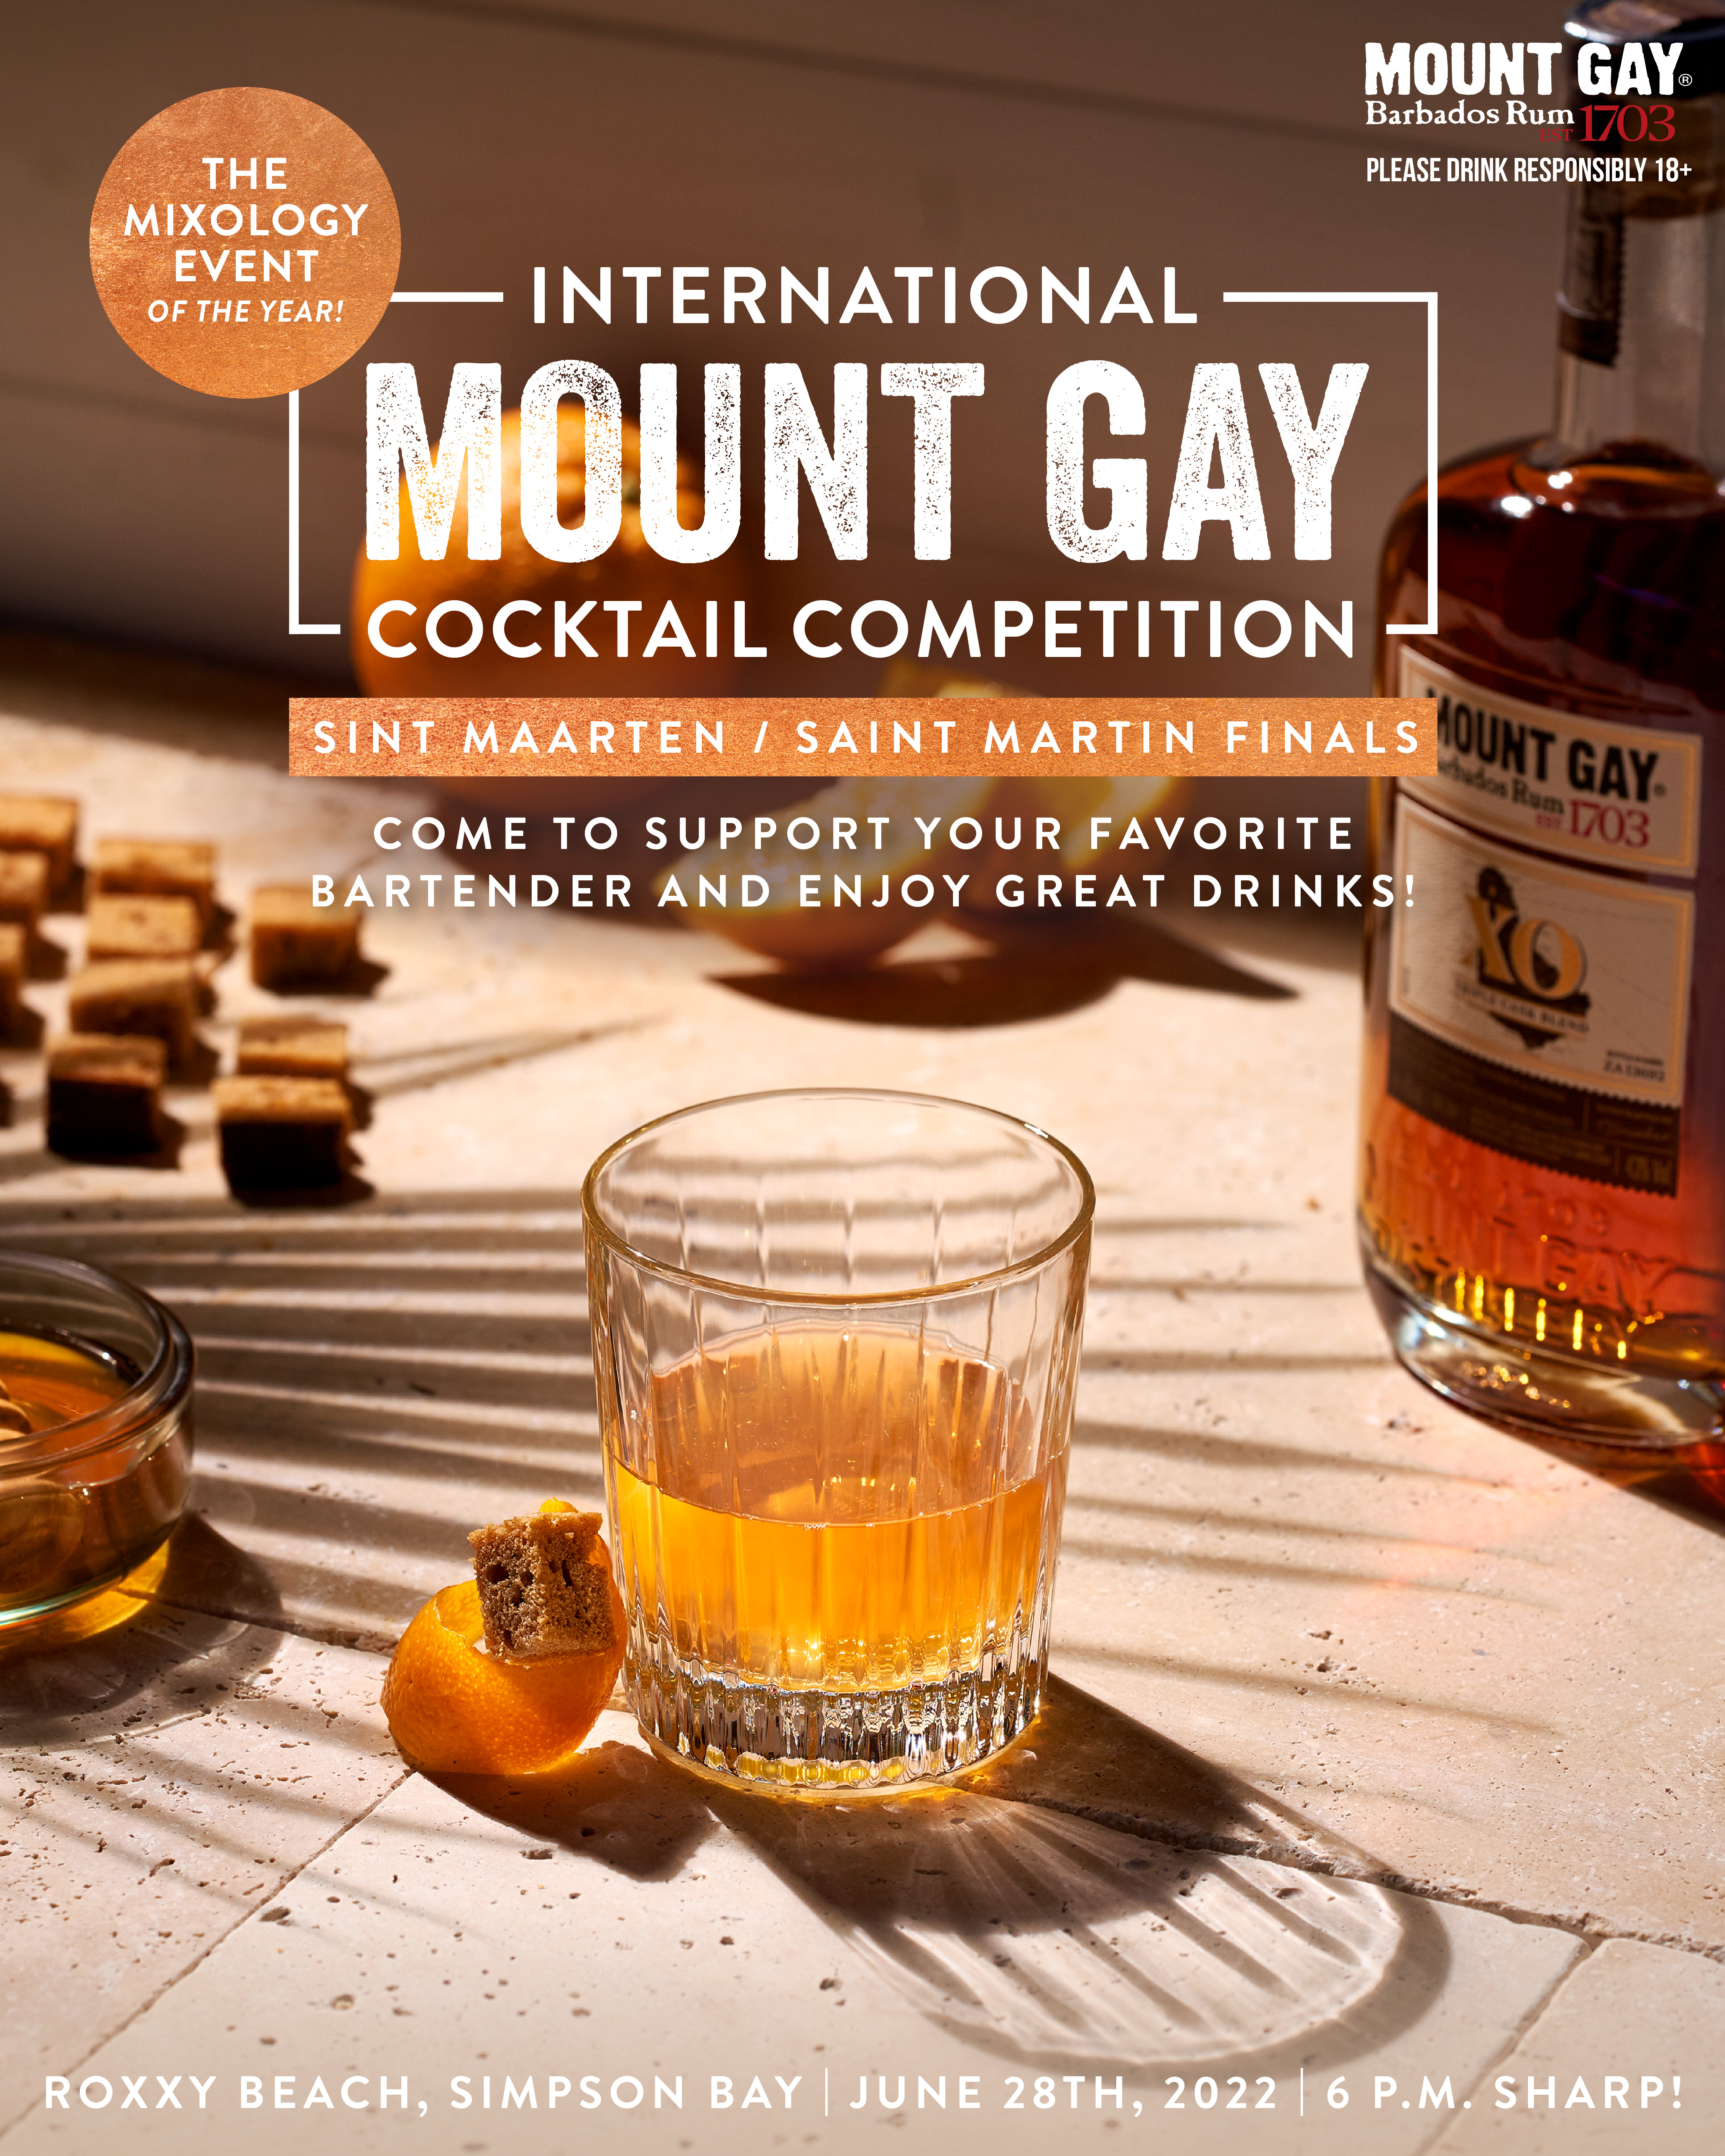 Mount Gay Rum hosts International Rum Cocktail Competition